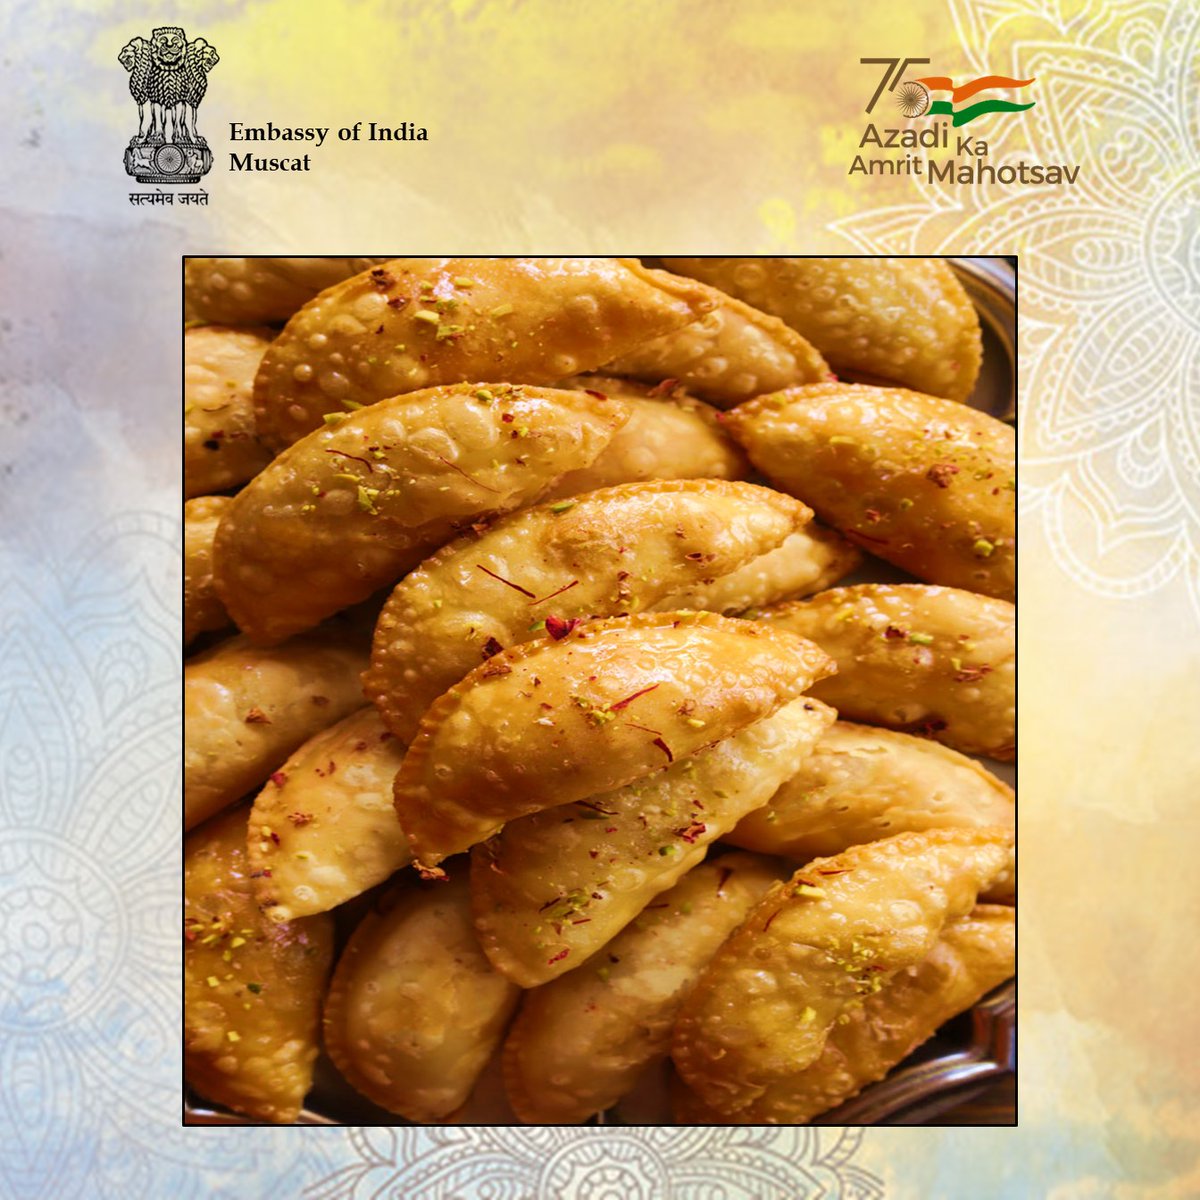 #IndiaStories

#Gujiya is a traditional sweet dish that literally melts in the mouth and is popularly eaten during #Holi festival in northern parts of #India.
It is a half-moon-shaped golden brown maida crust stuffed with pieces of pistachios, almonds, dry coconut, & cardamoms.